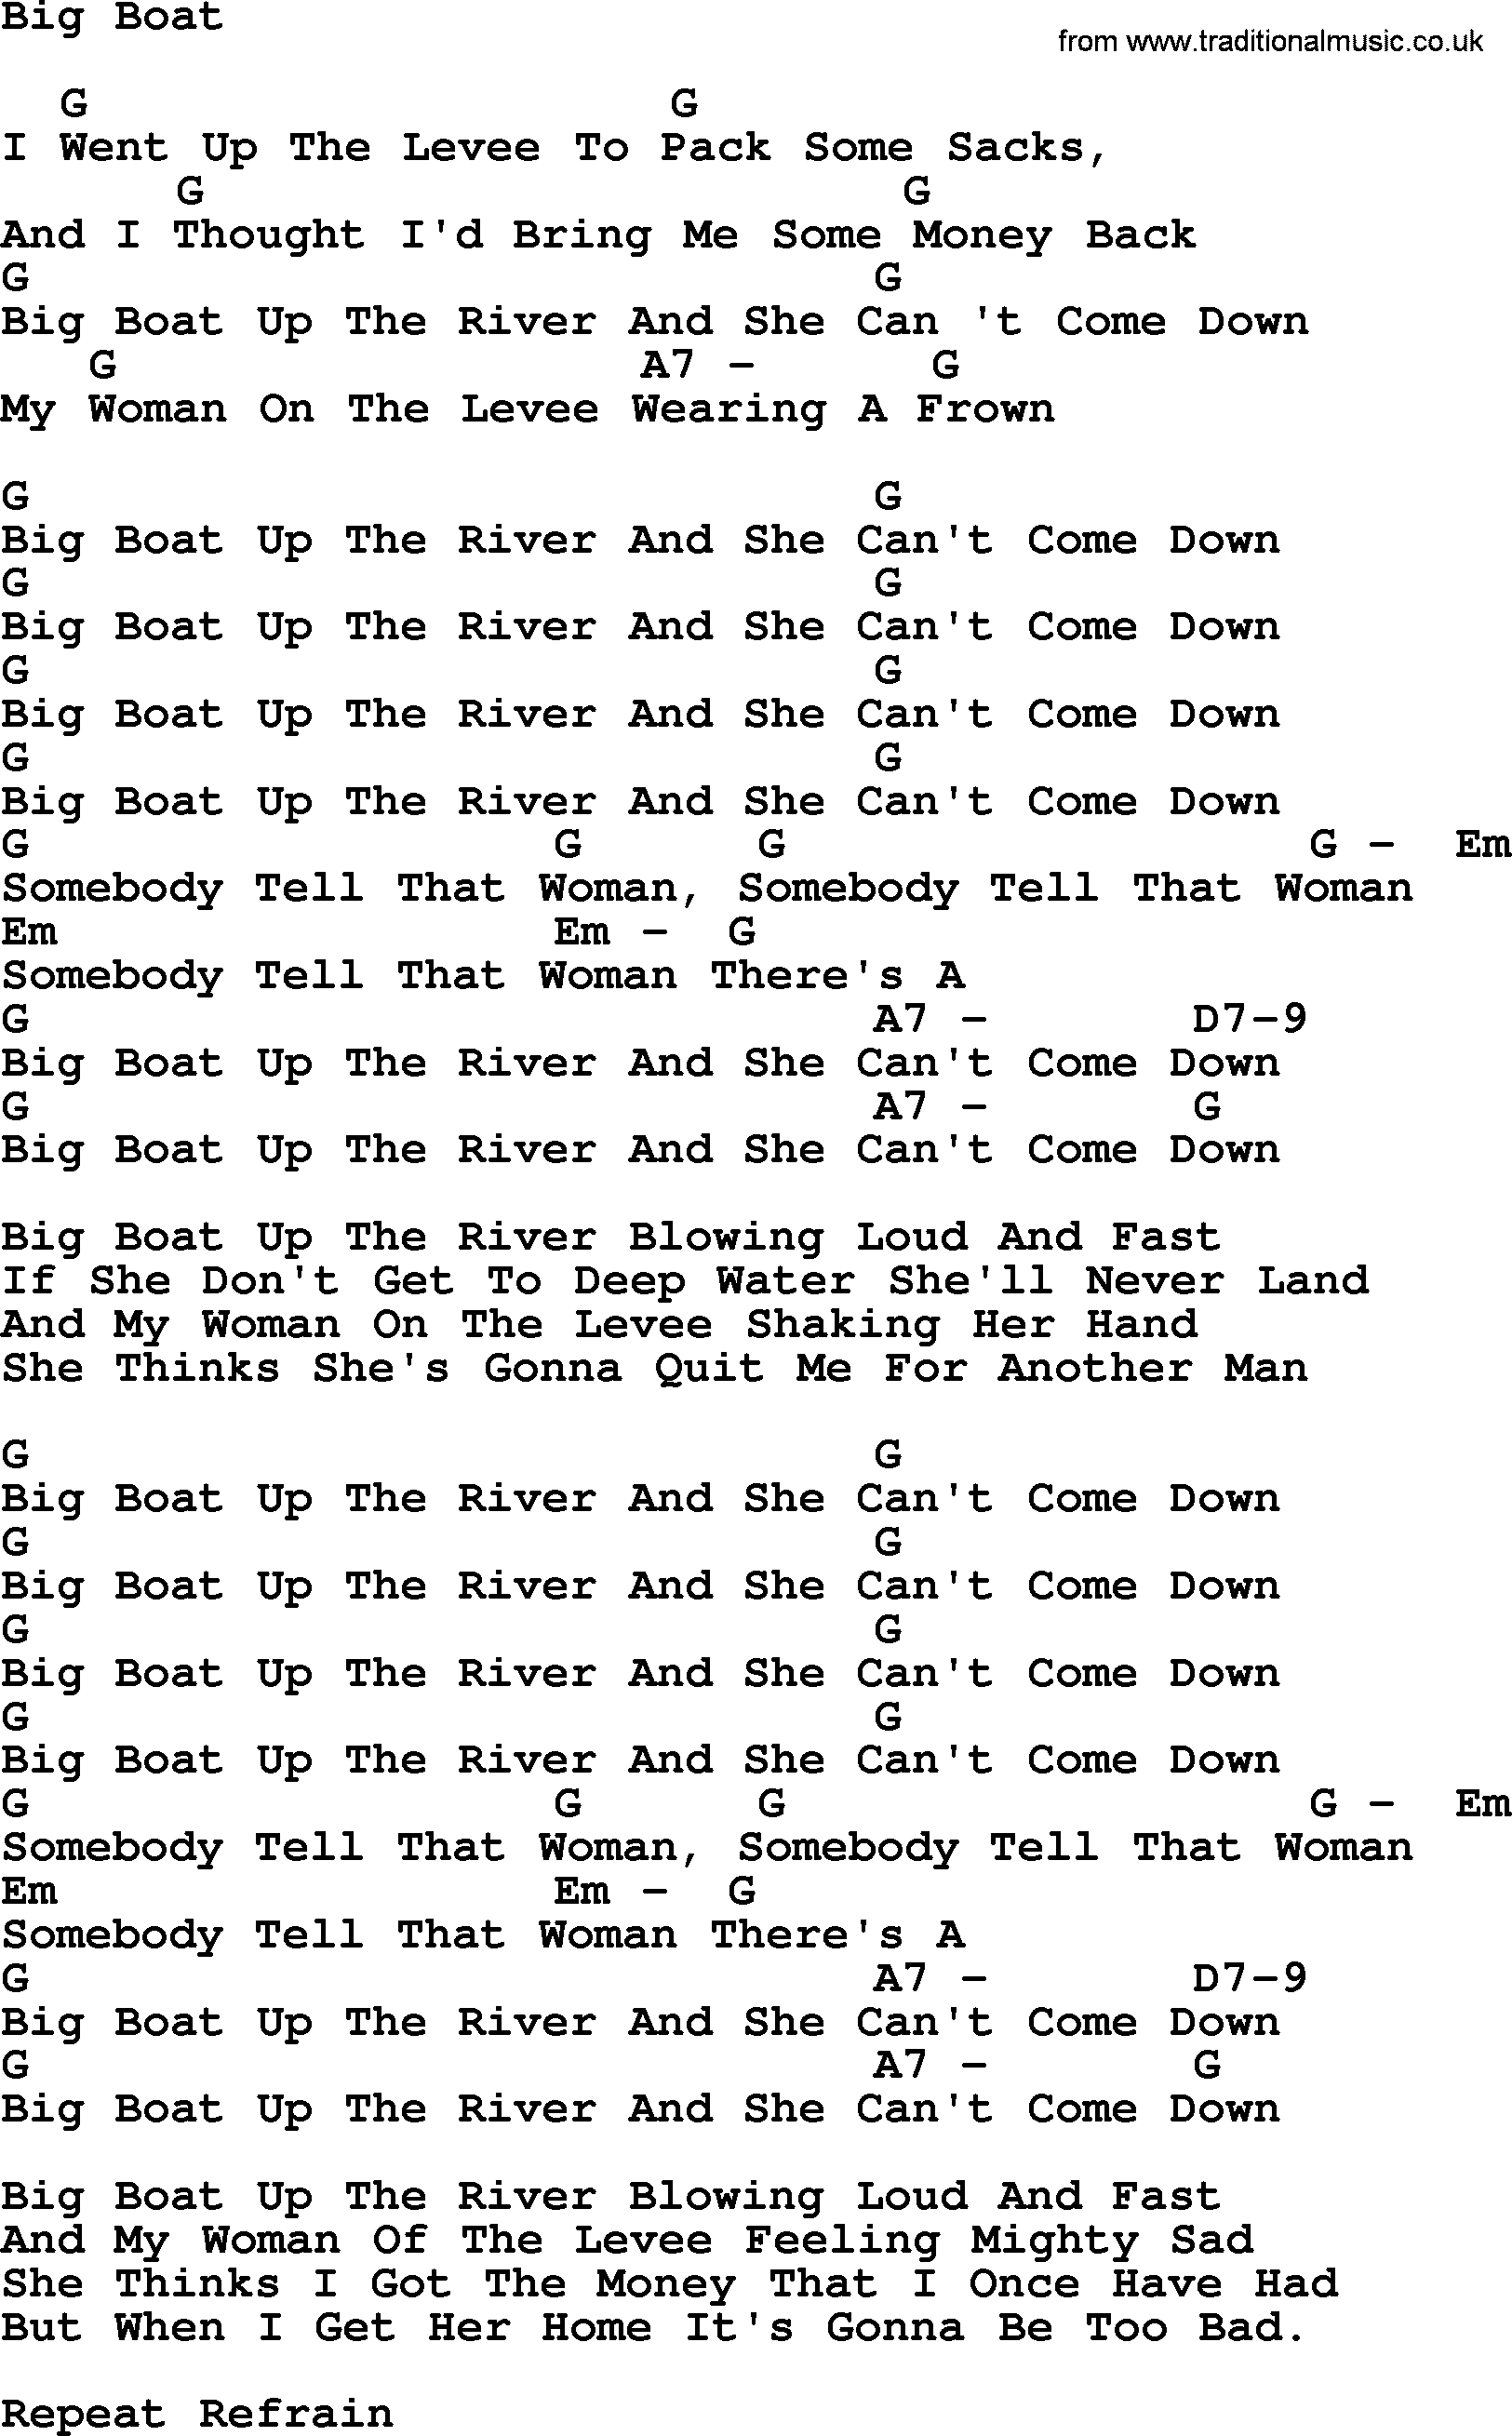 Peter, Paul and Mary song Big Boat, lyrics and chords